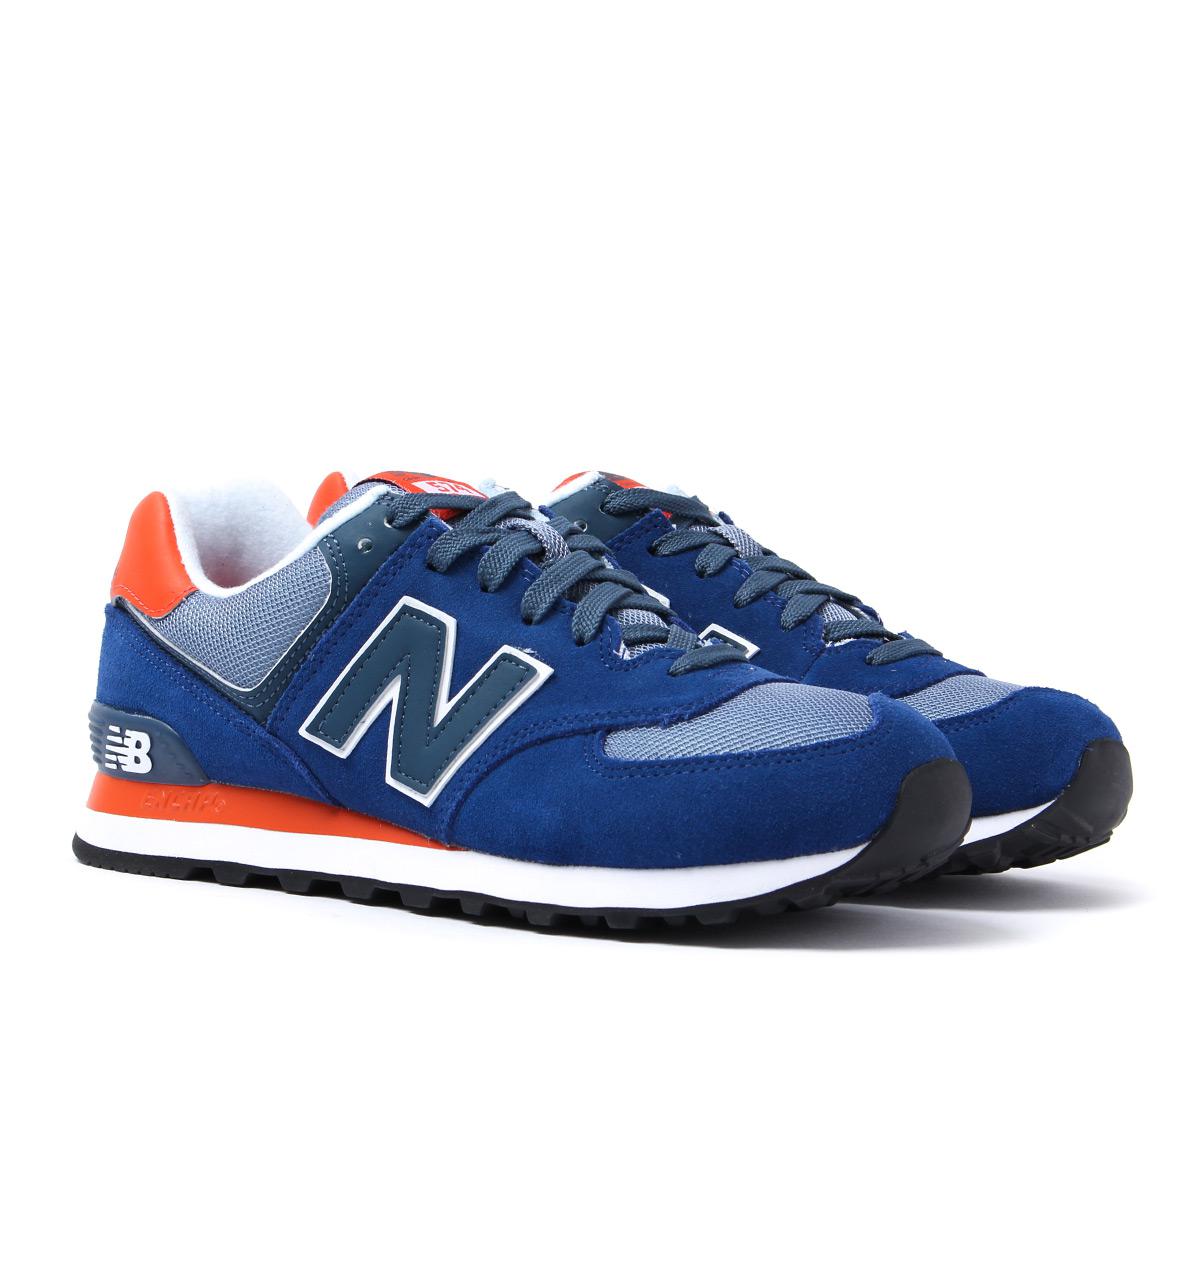 New Balance 574 Royal Blue & Orange Suede Trainers for Men - Lyst